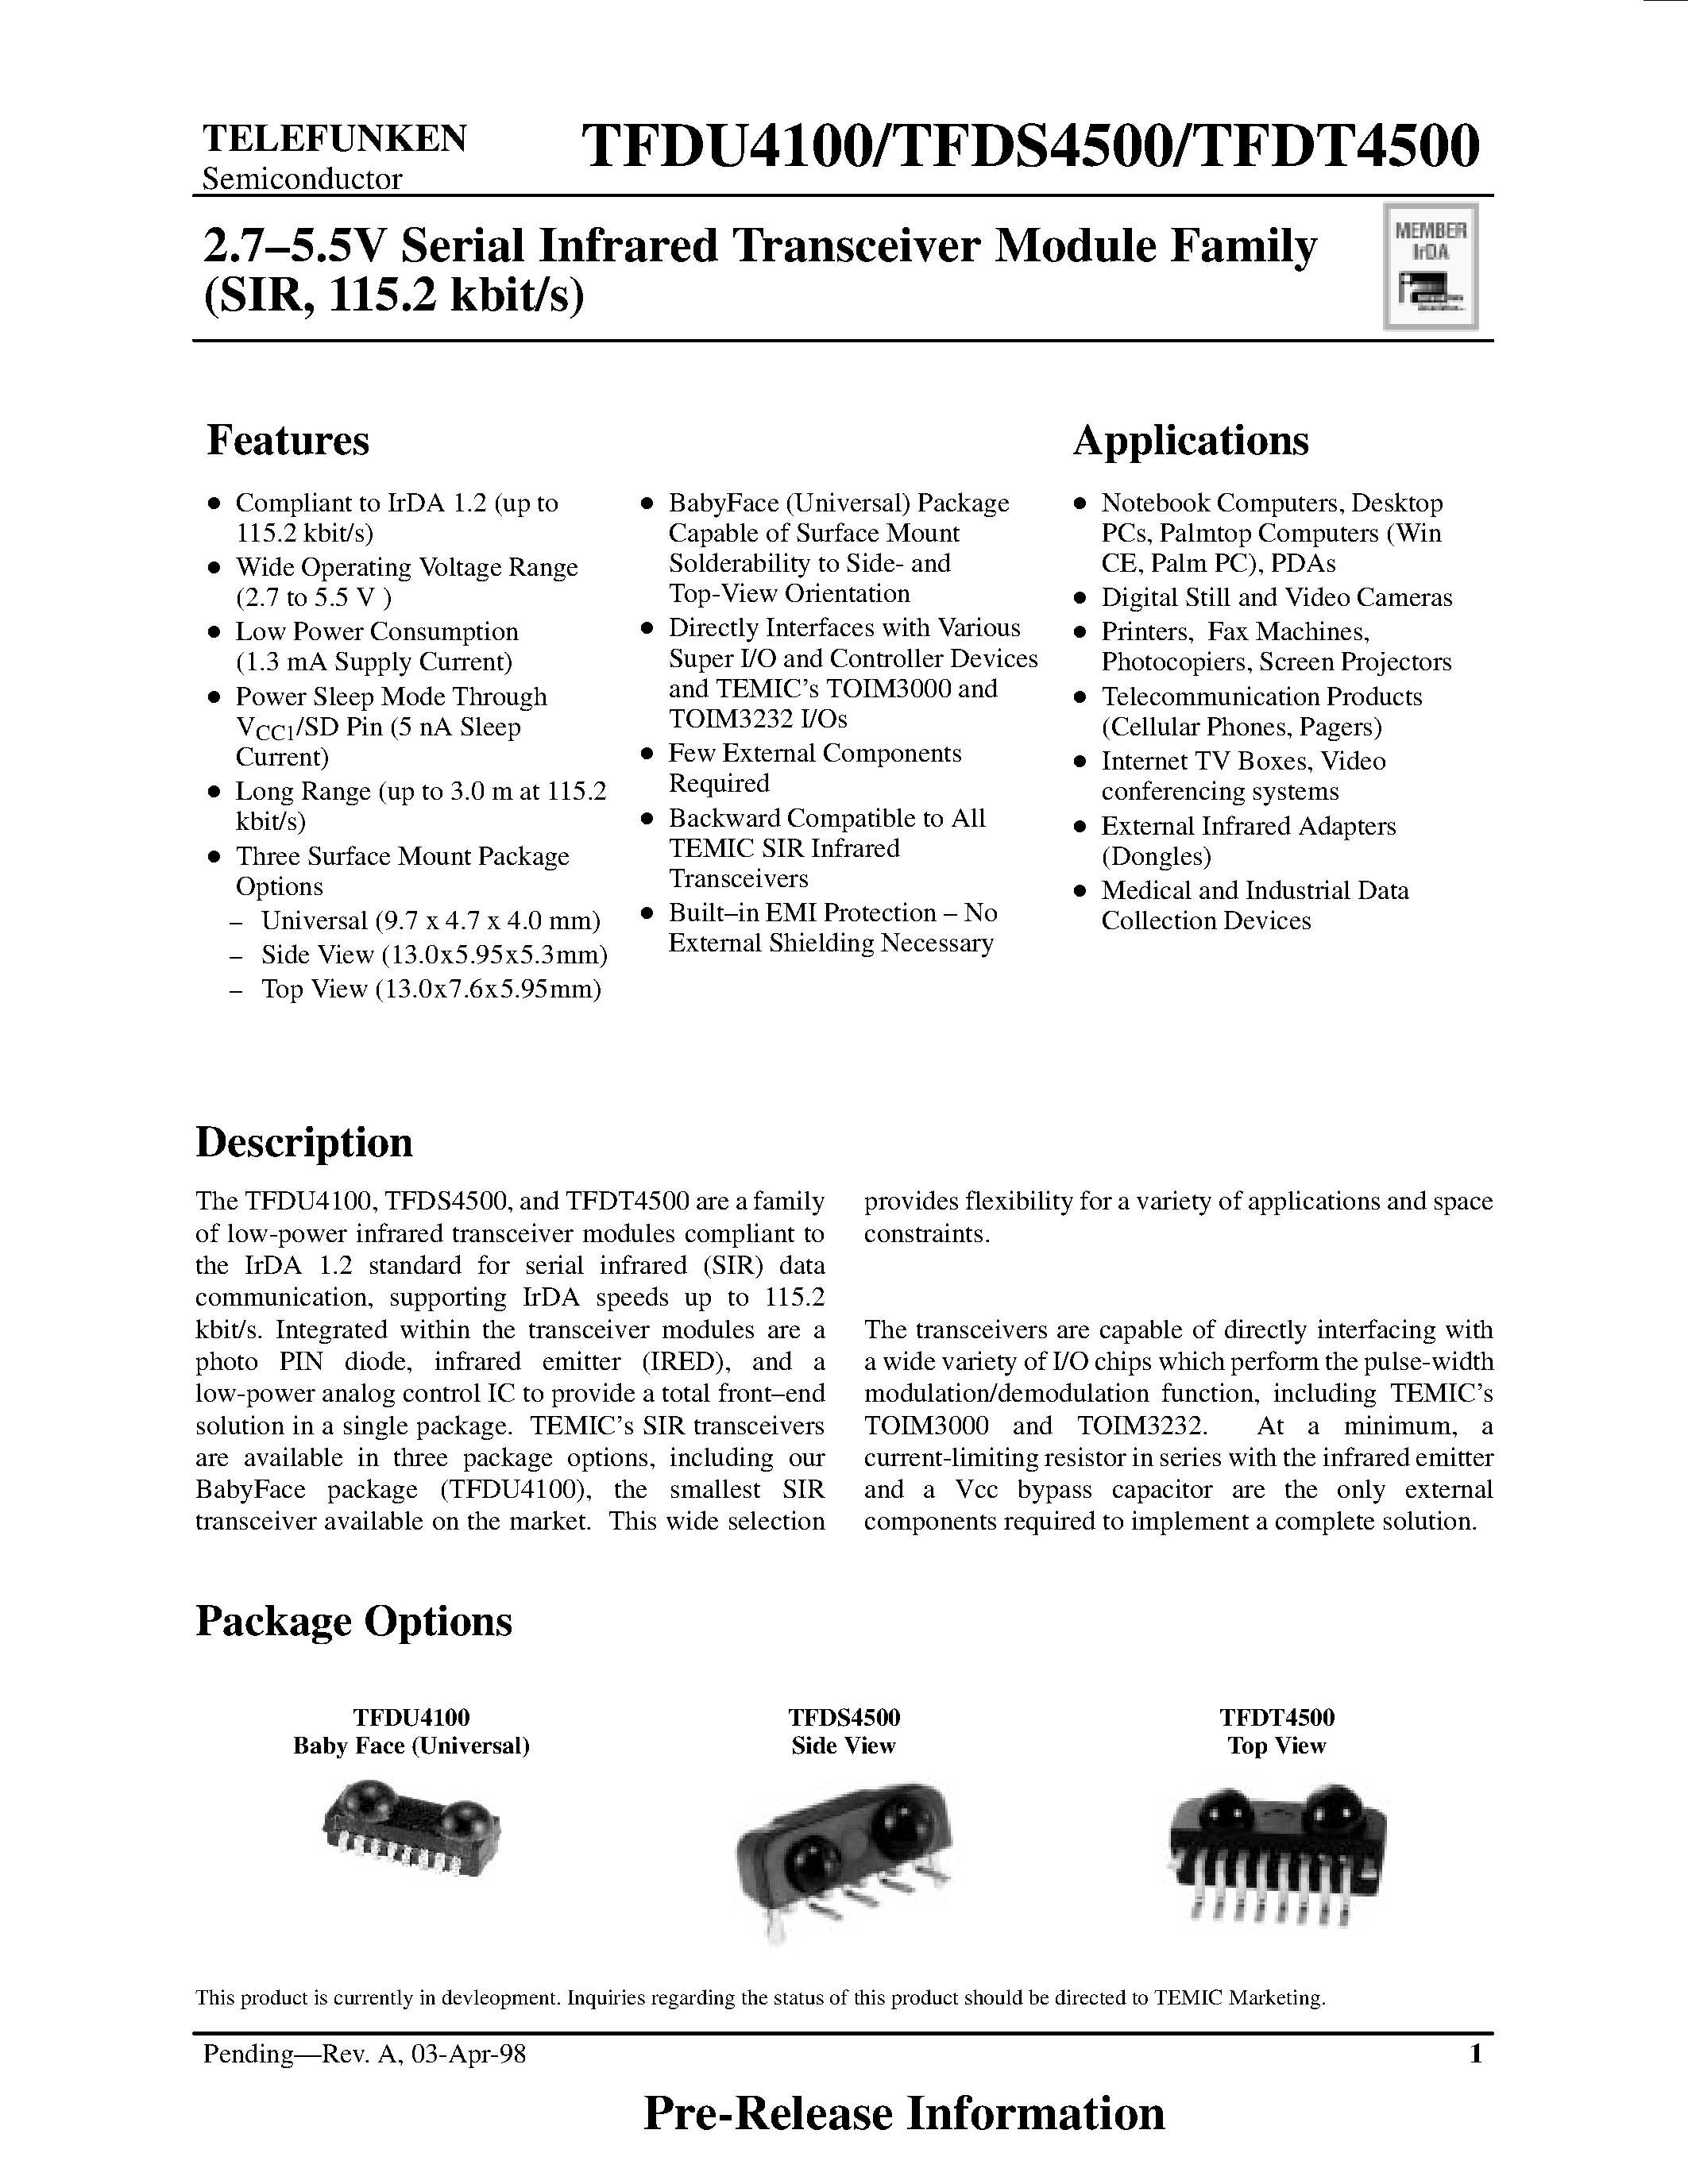 Даташит TFDS4500 - 2.7-5.5V Serial Infrared Transceiver Module Family страница 1